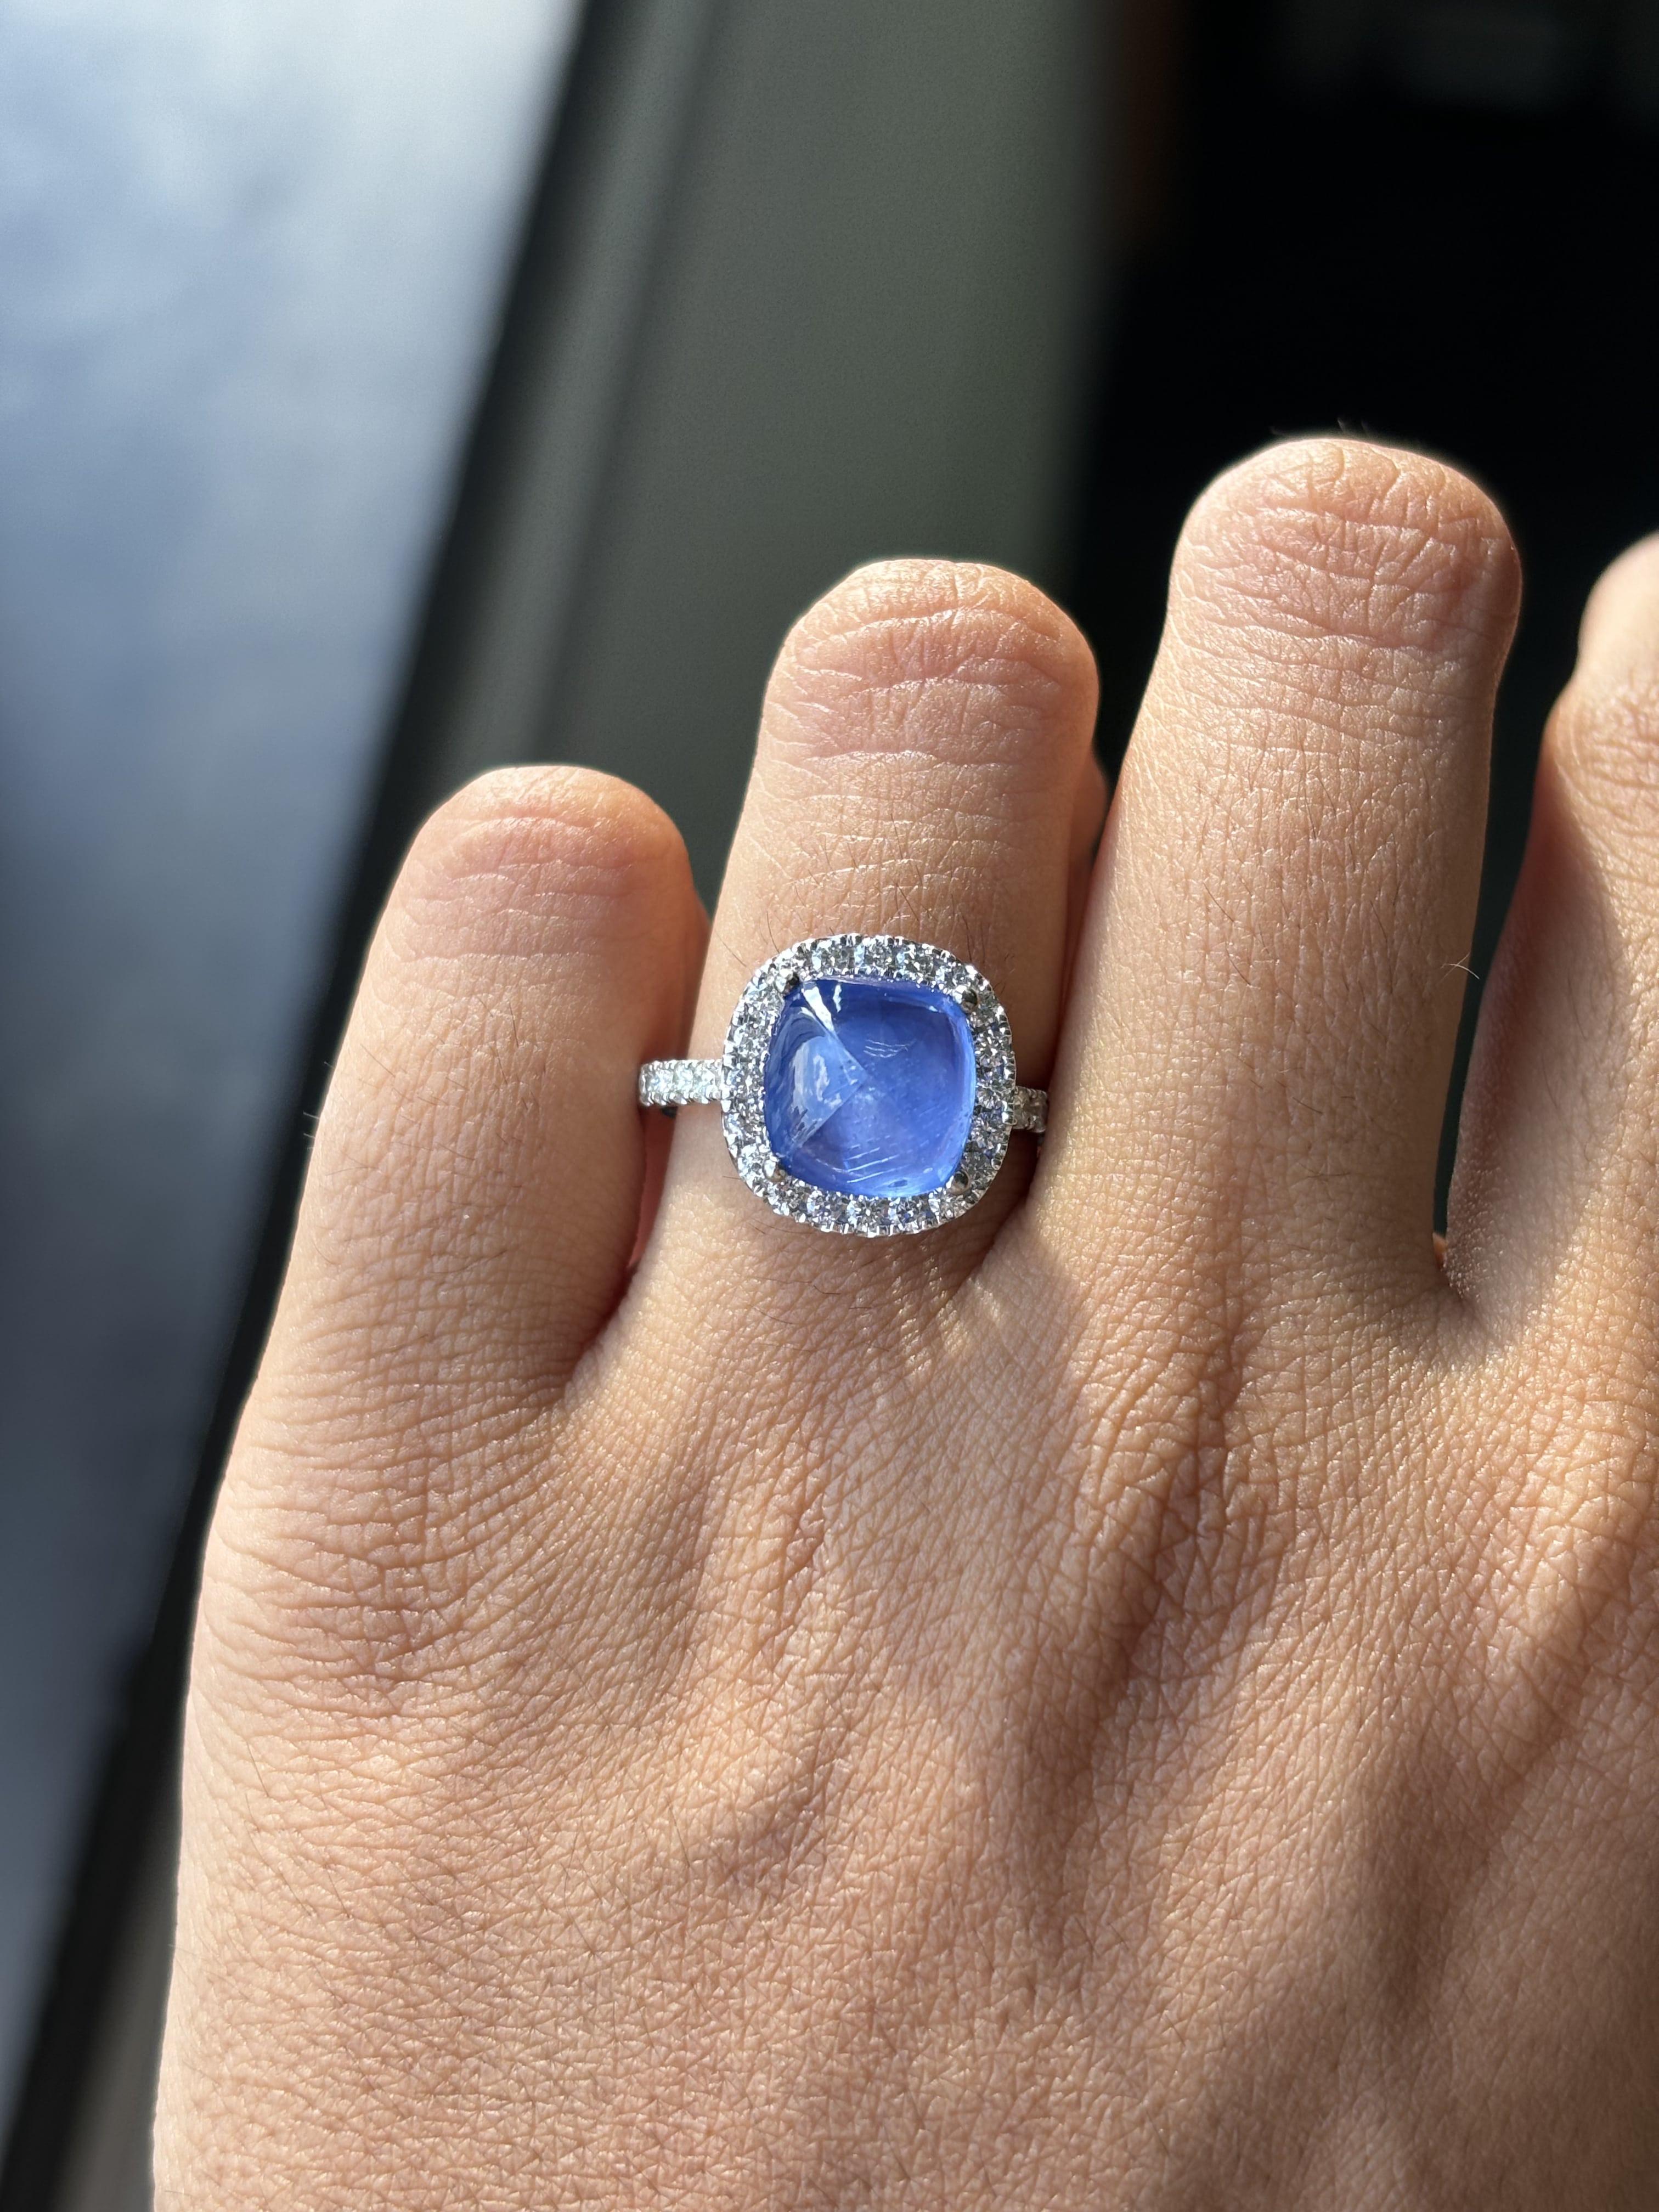 4.23 Carat Sugarloaf Ceylon Sapphire Ring with Halo Diamonds in 14K White Gold For Sale 2